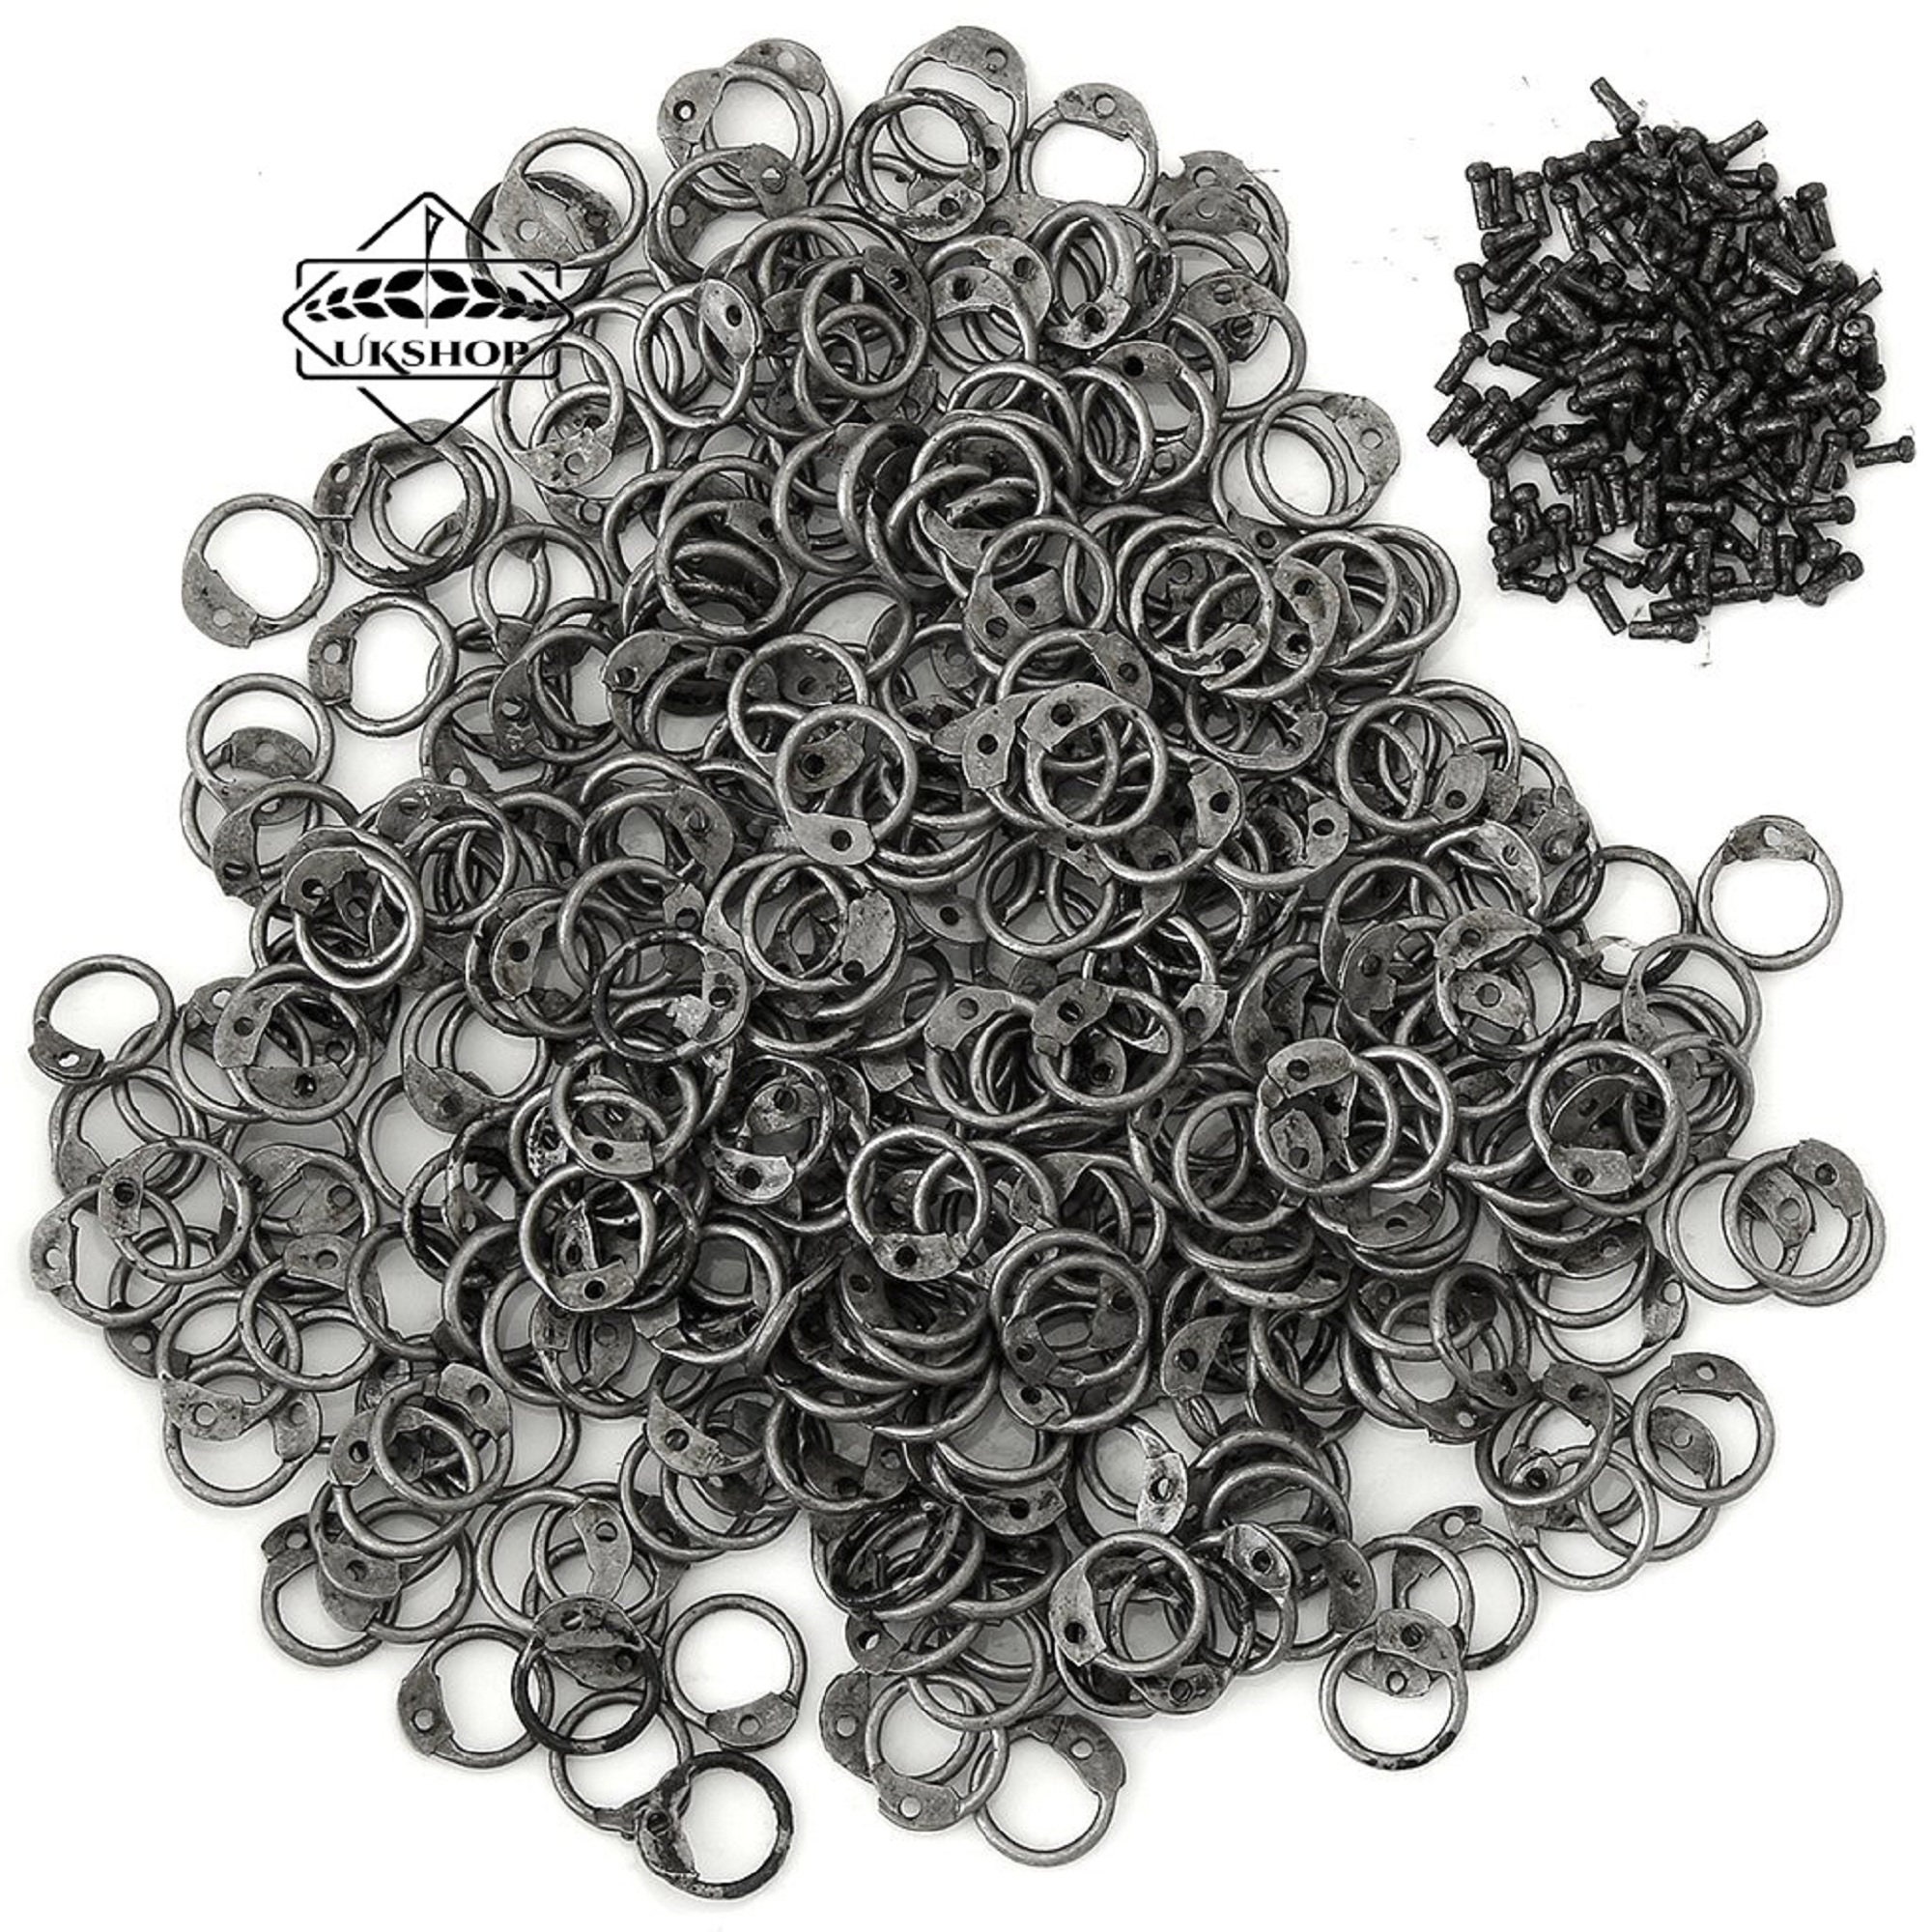 By The Sword, Inc. - Loose Chainmail Rings - Flat Ring Wedge Riveted 9mm